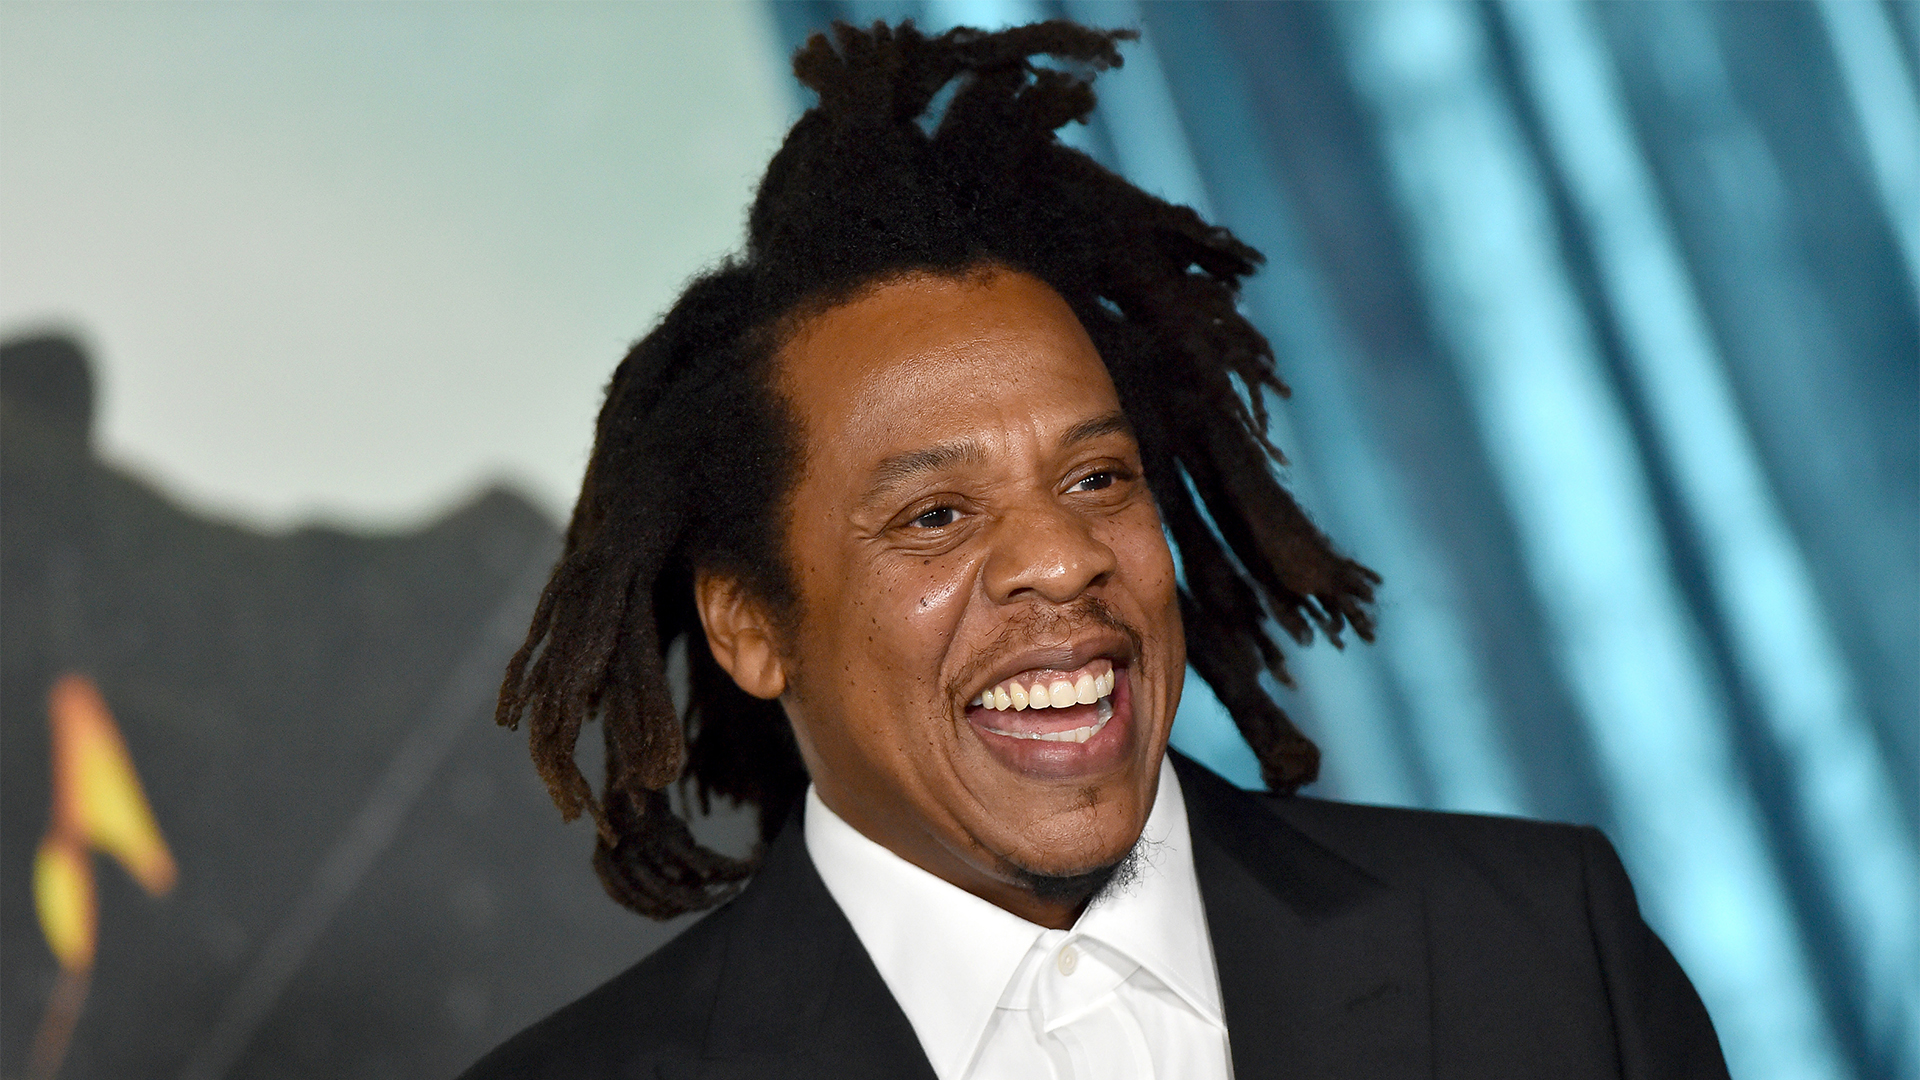 Jay-Z Dining At Black-Owned Restaurant Leads To Boost After Being 'Up And Down' For 11 Months